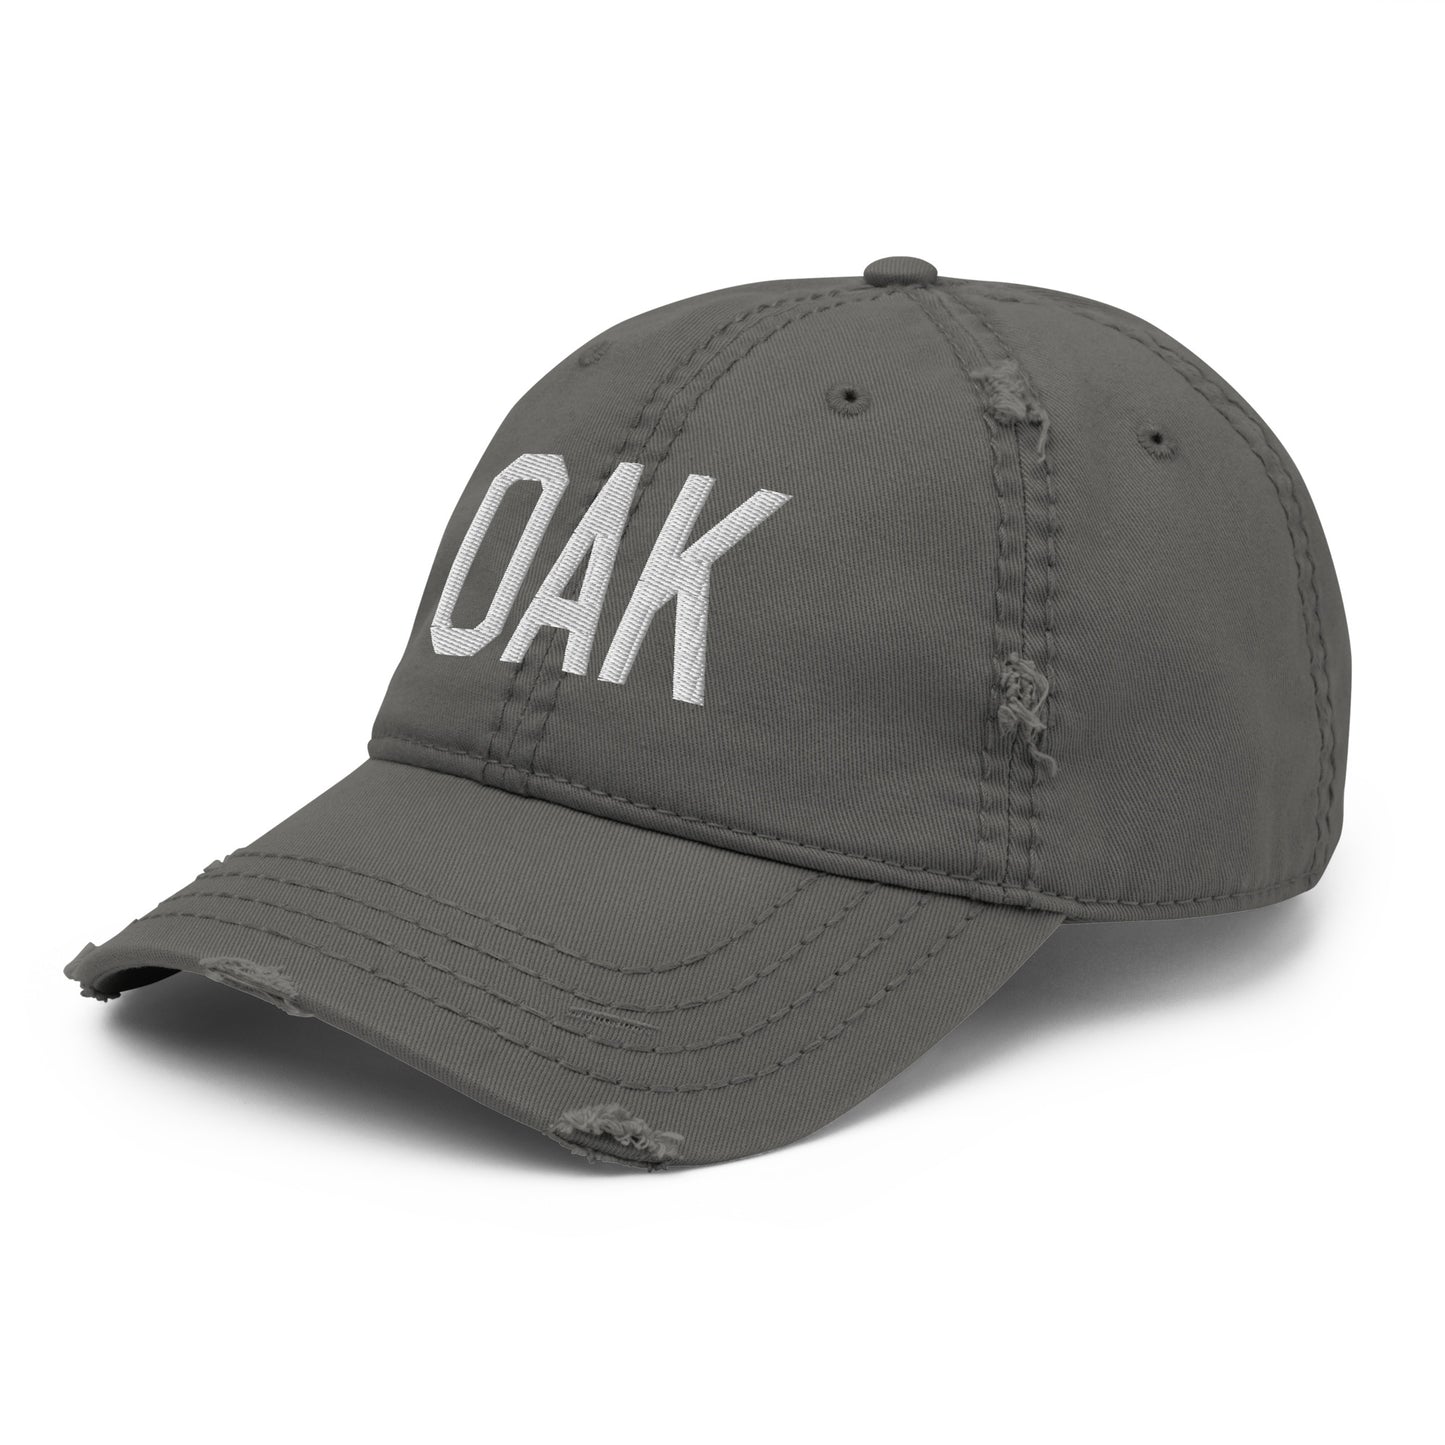 Airport Code Distressed Hat - White • OAK Oakland • YHM Designs - Image 16